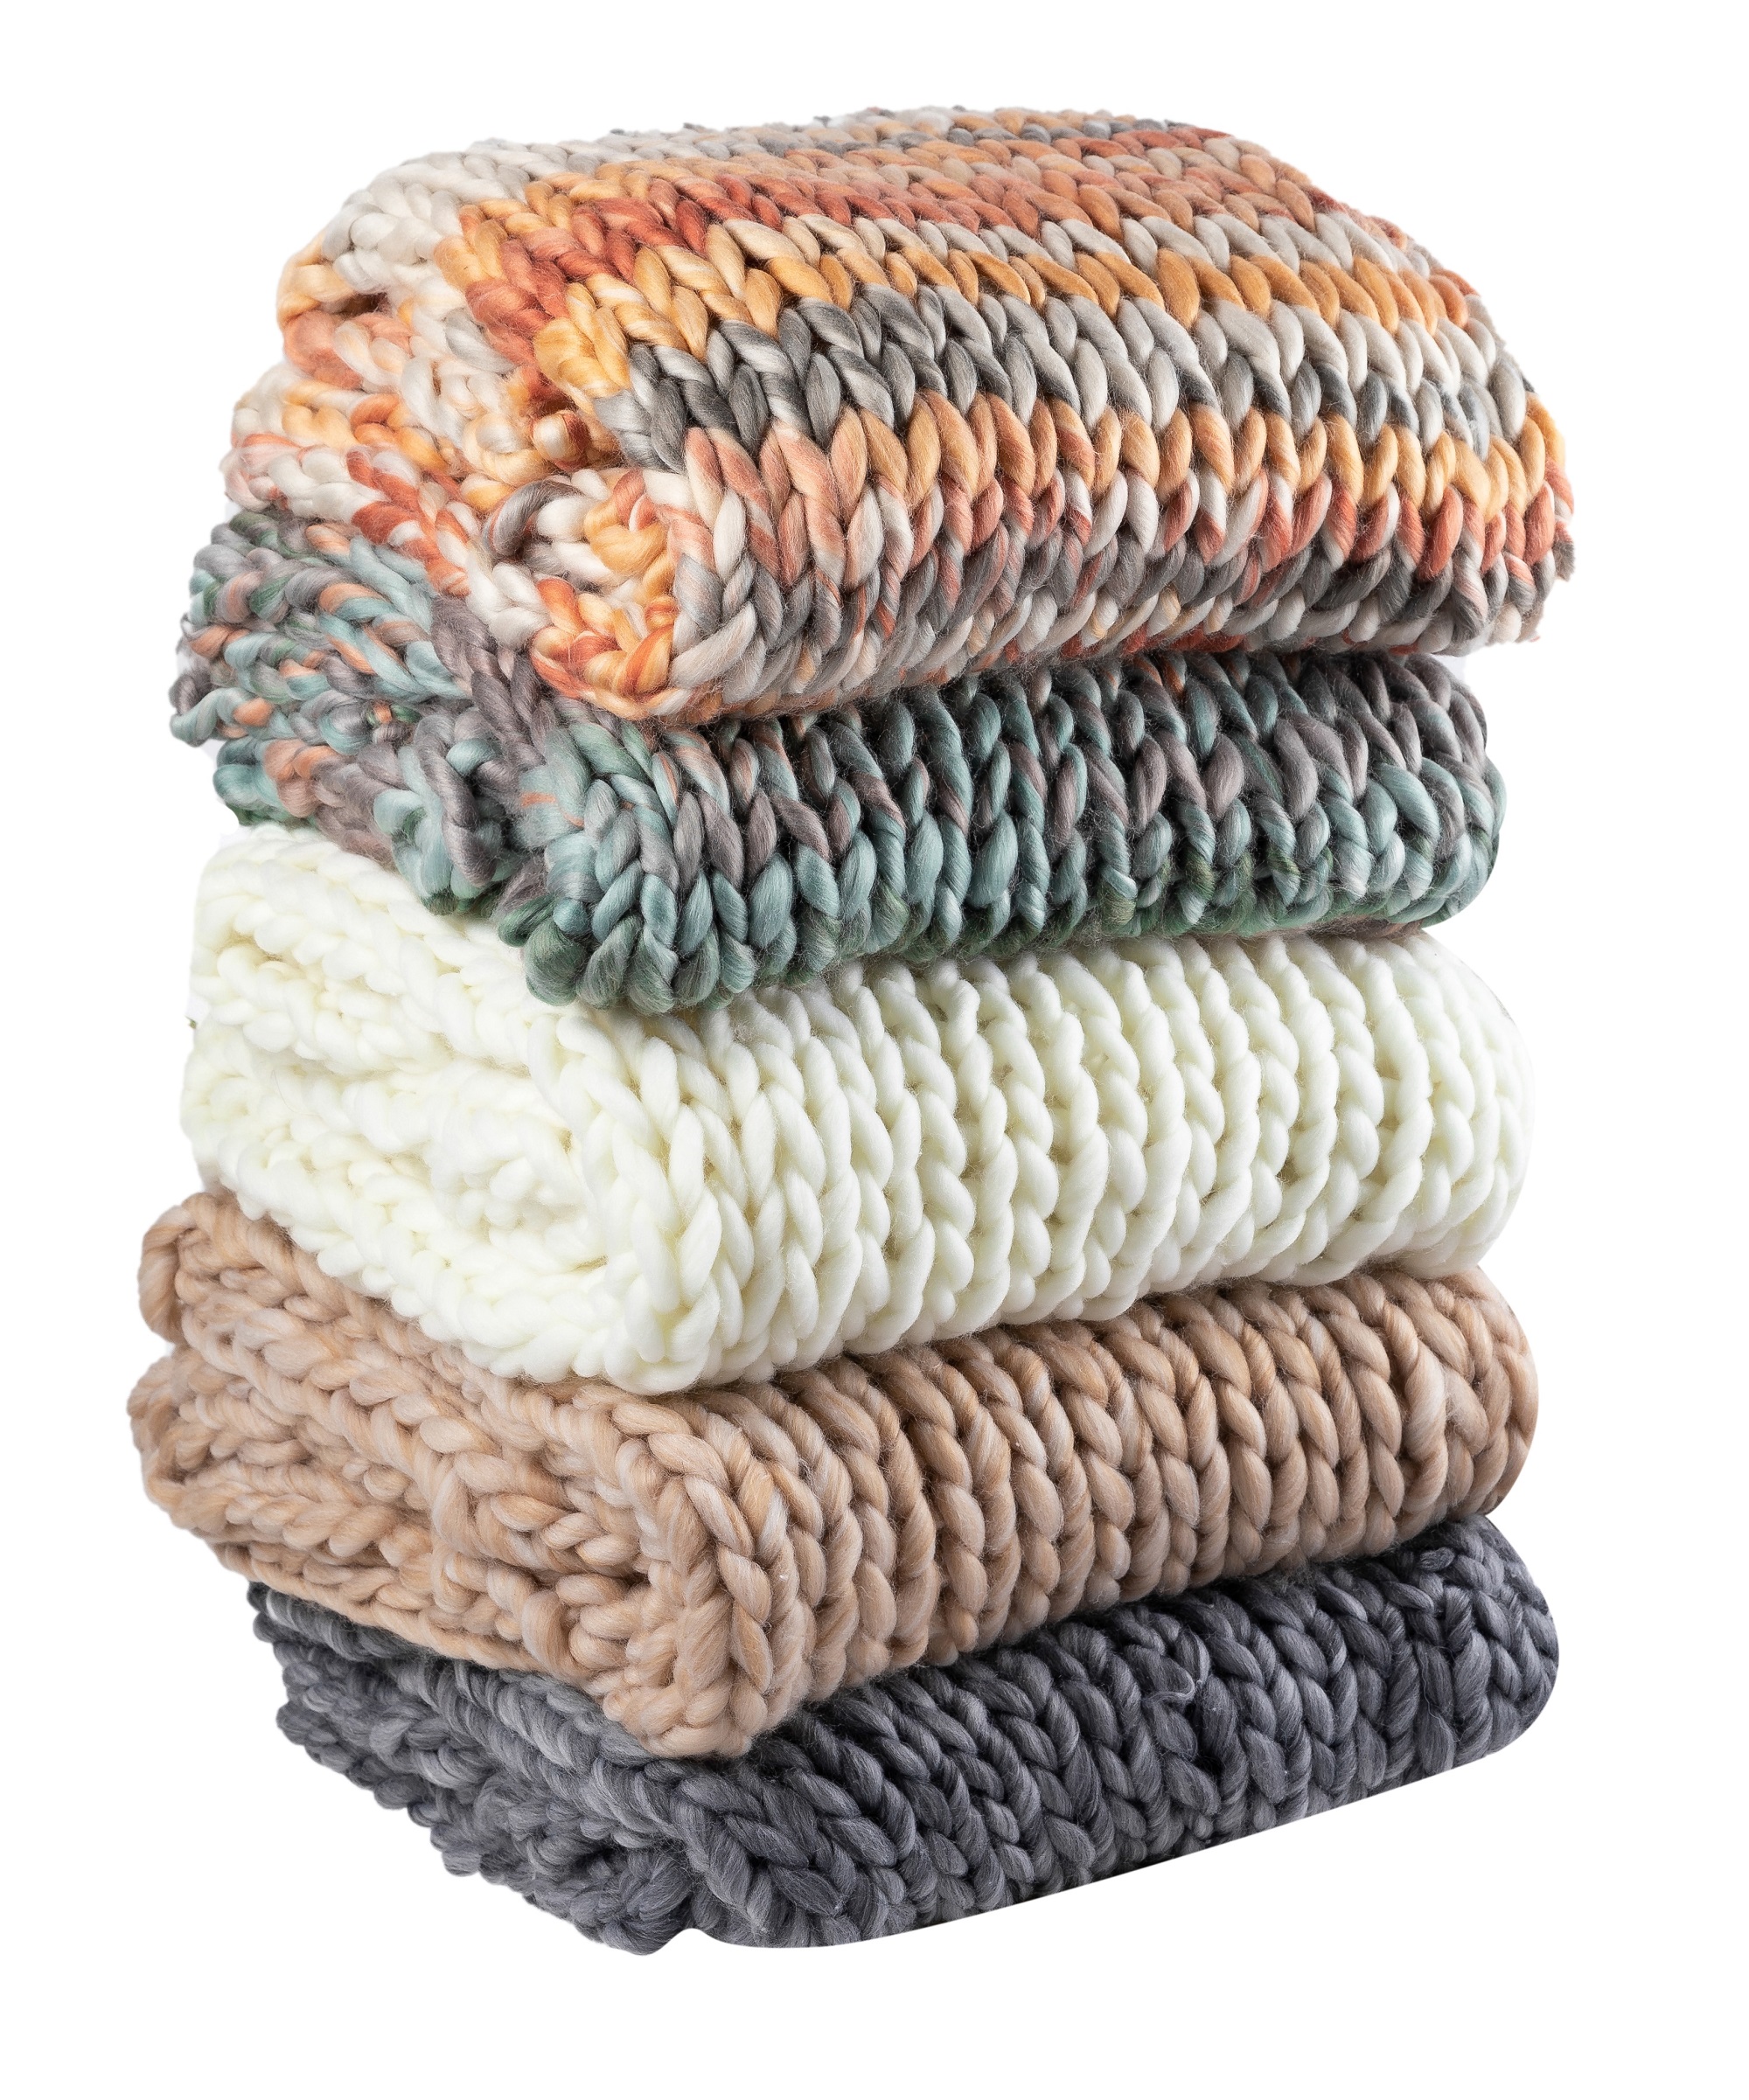 Silver One International Chunky Knitted Throw Blanket, Preppy Soft Hues, 50" x 60" - image 3 of 6